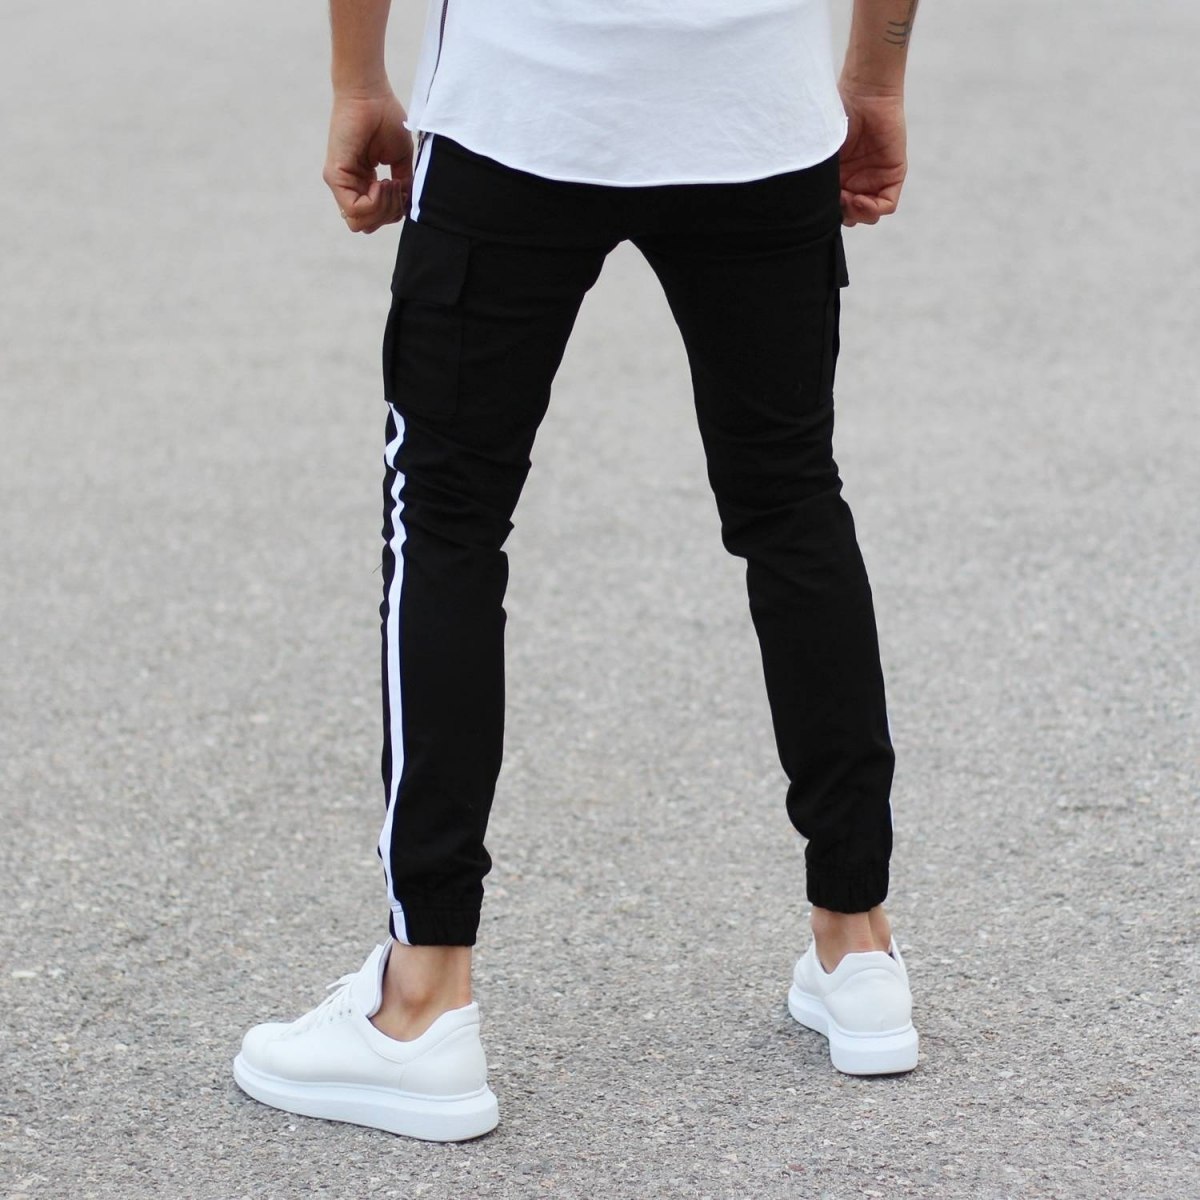 Black Pants With Large Pockets and Side-Stripes | Martin Valen